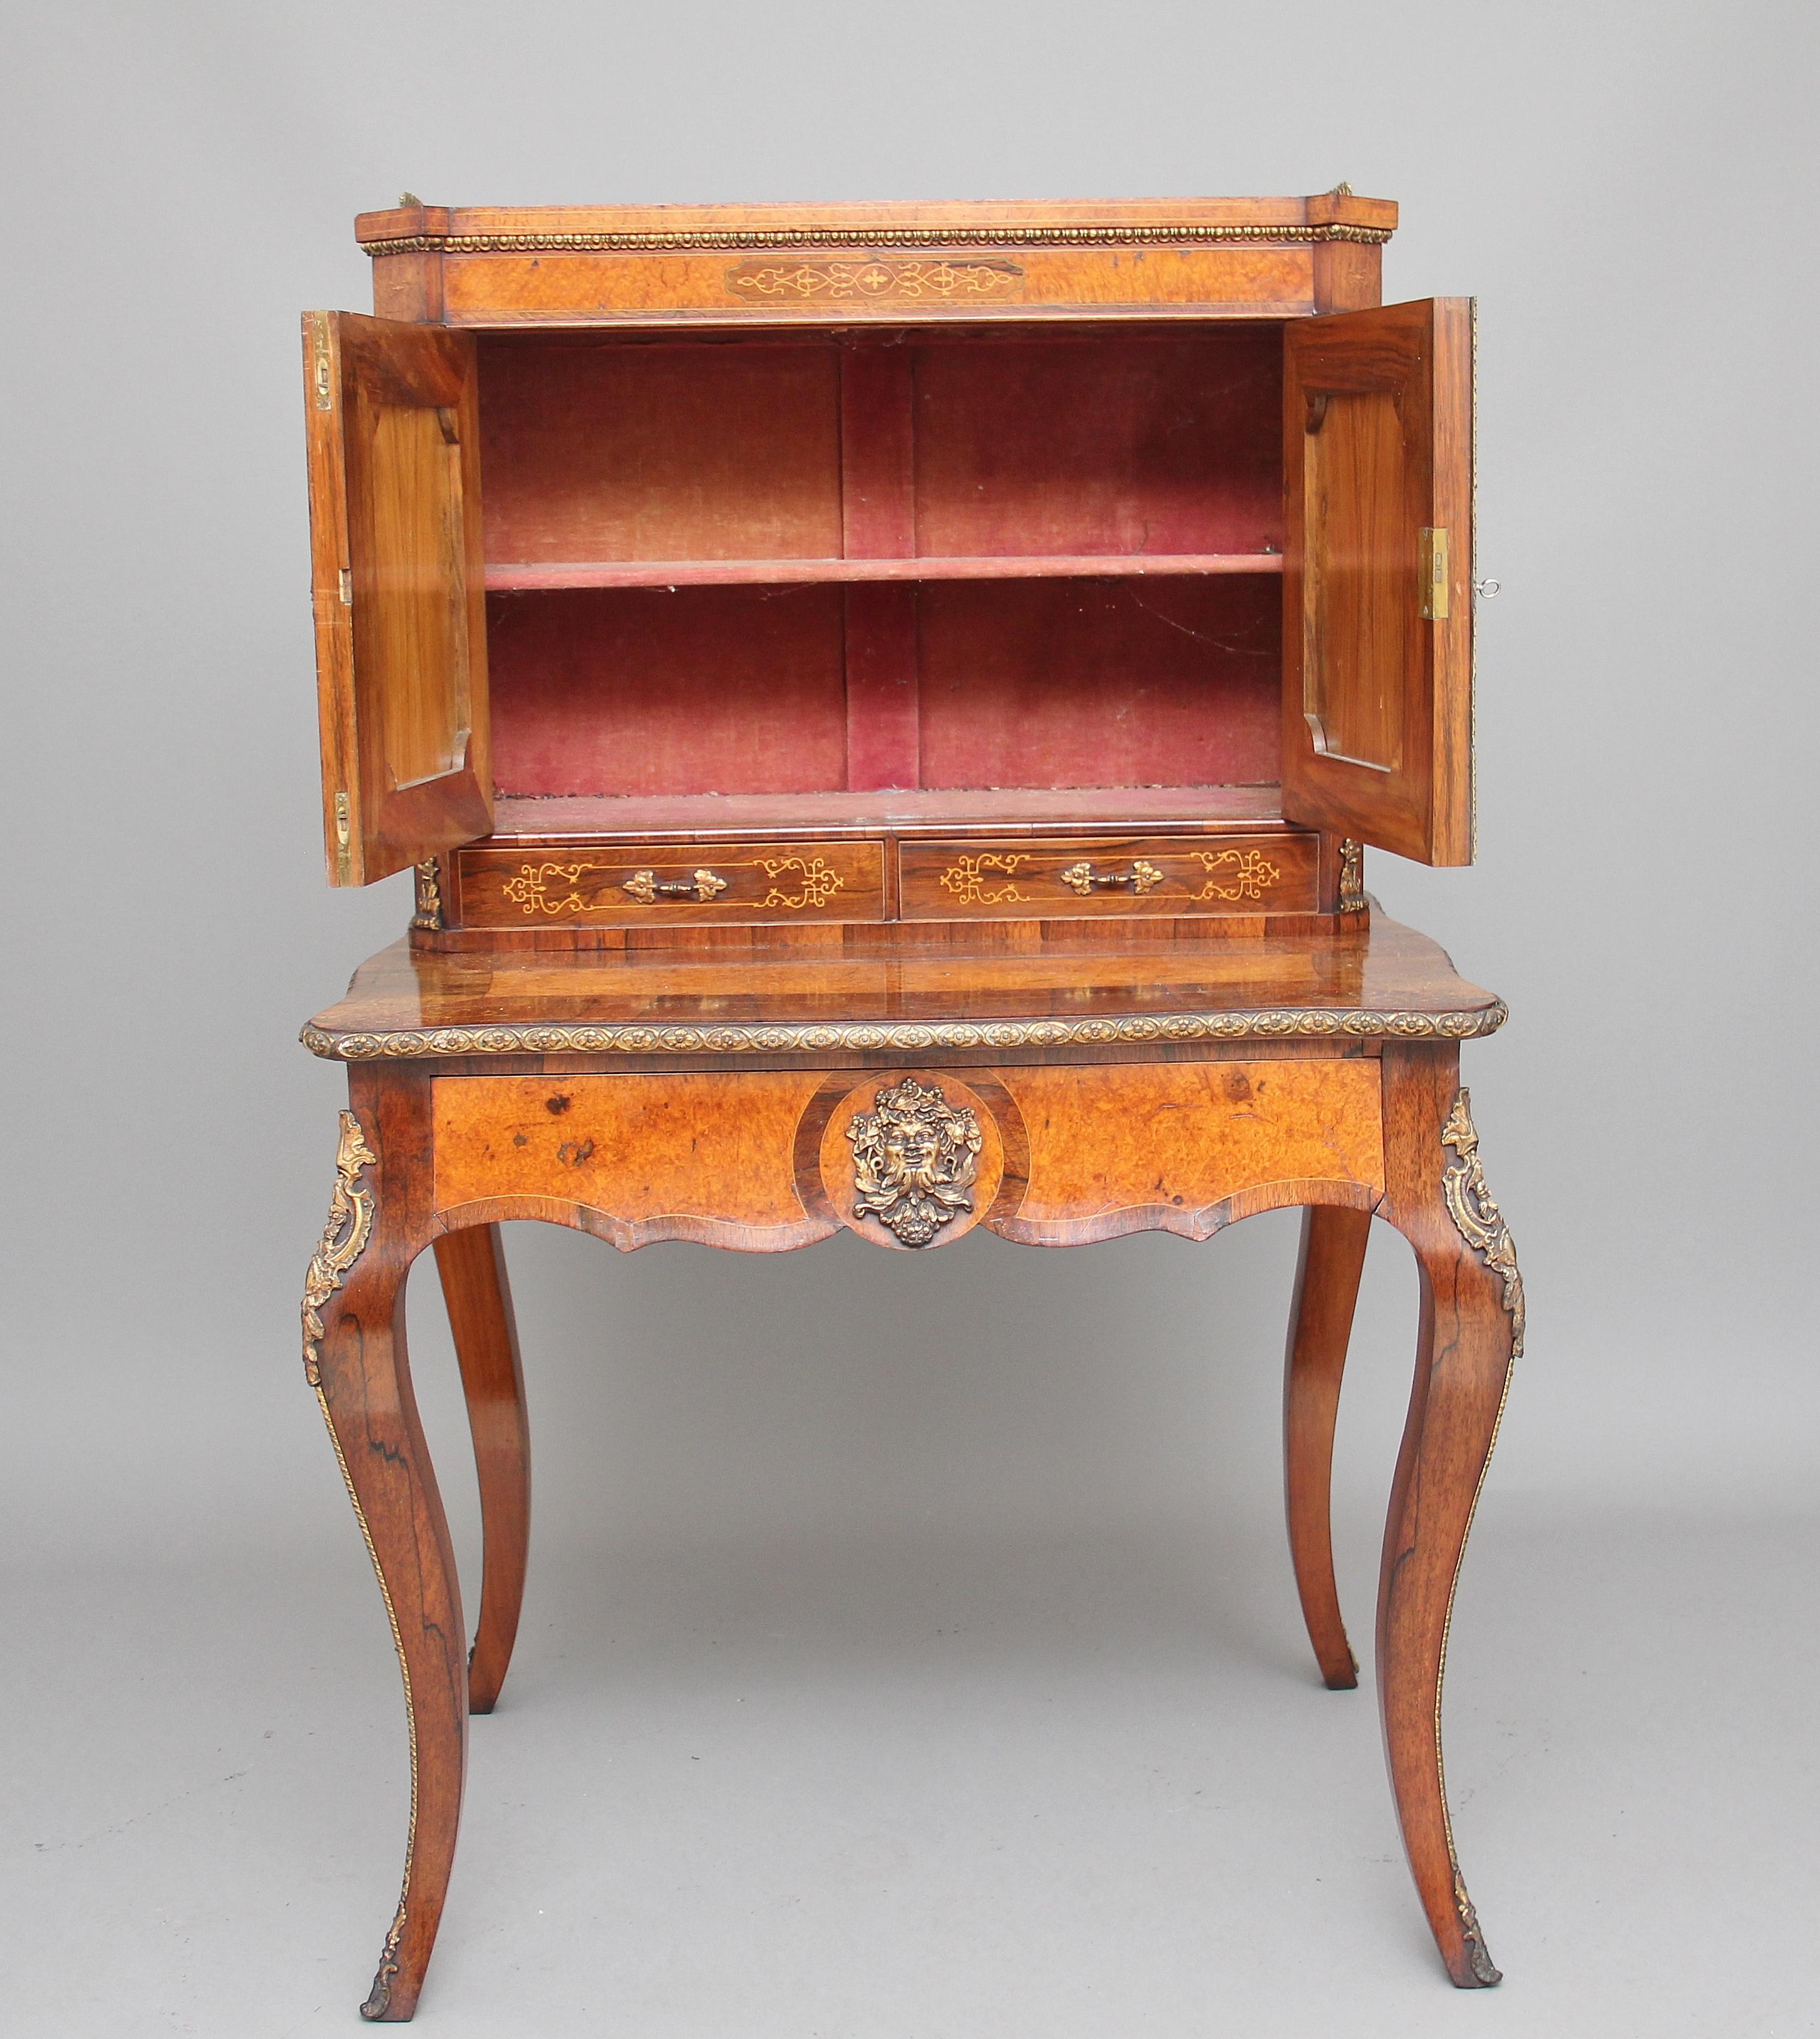 A superb quality, 19th century rosewood and amboyna bonheur du jour, the canted top section having a brass gallery with two panel doors below opening to reveal a single fixed shelf inside and two small drawers below the doors, lovely quality ormolu